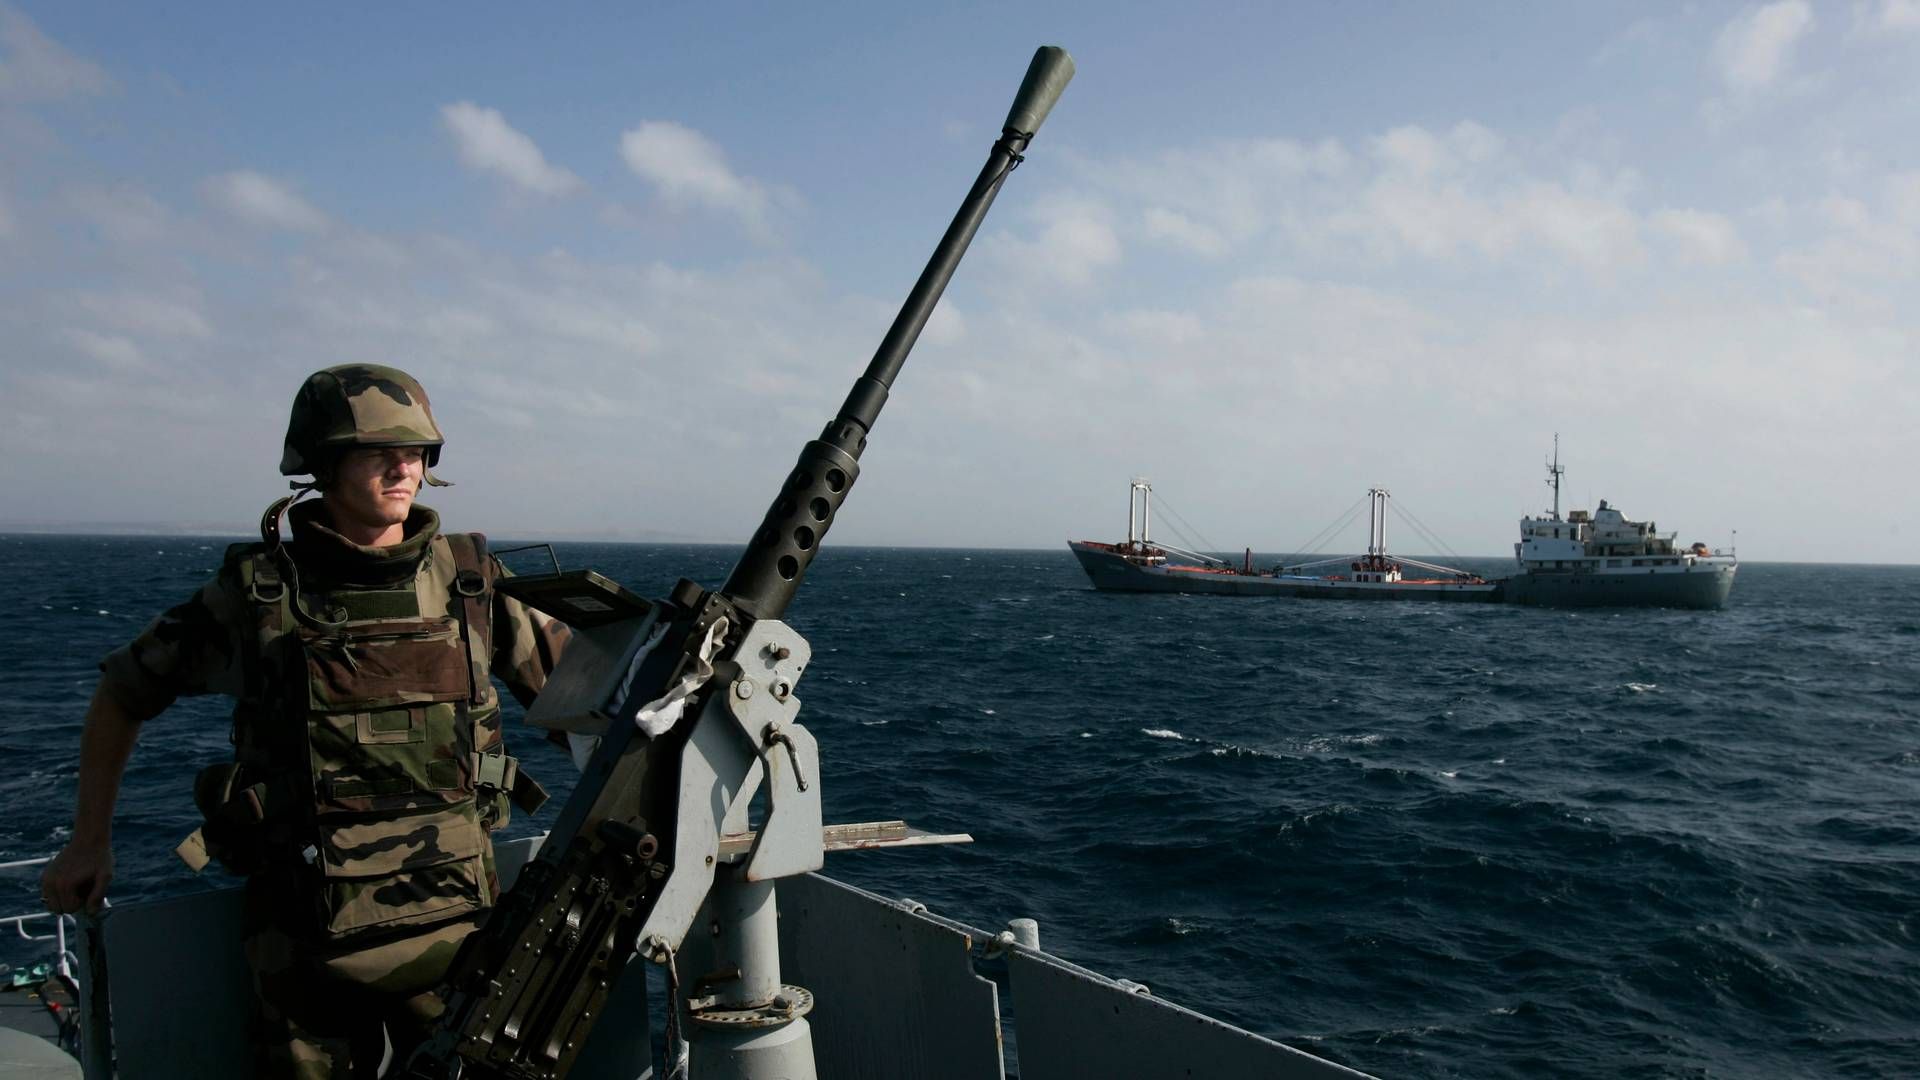 A French soldier aboard a warship deployed to Somalia to protect cargo ships from pirate attacks in 2007. | Photo: Karel Prinsloo/AP/Ritzau Scanpix